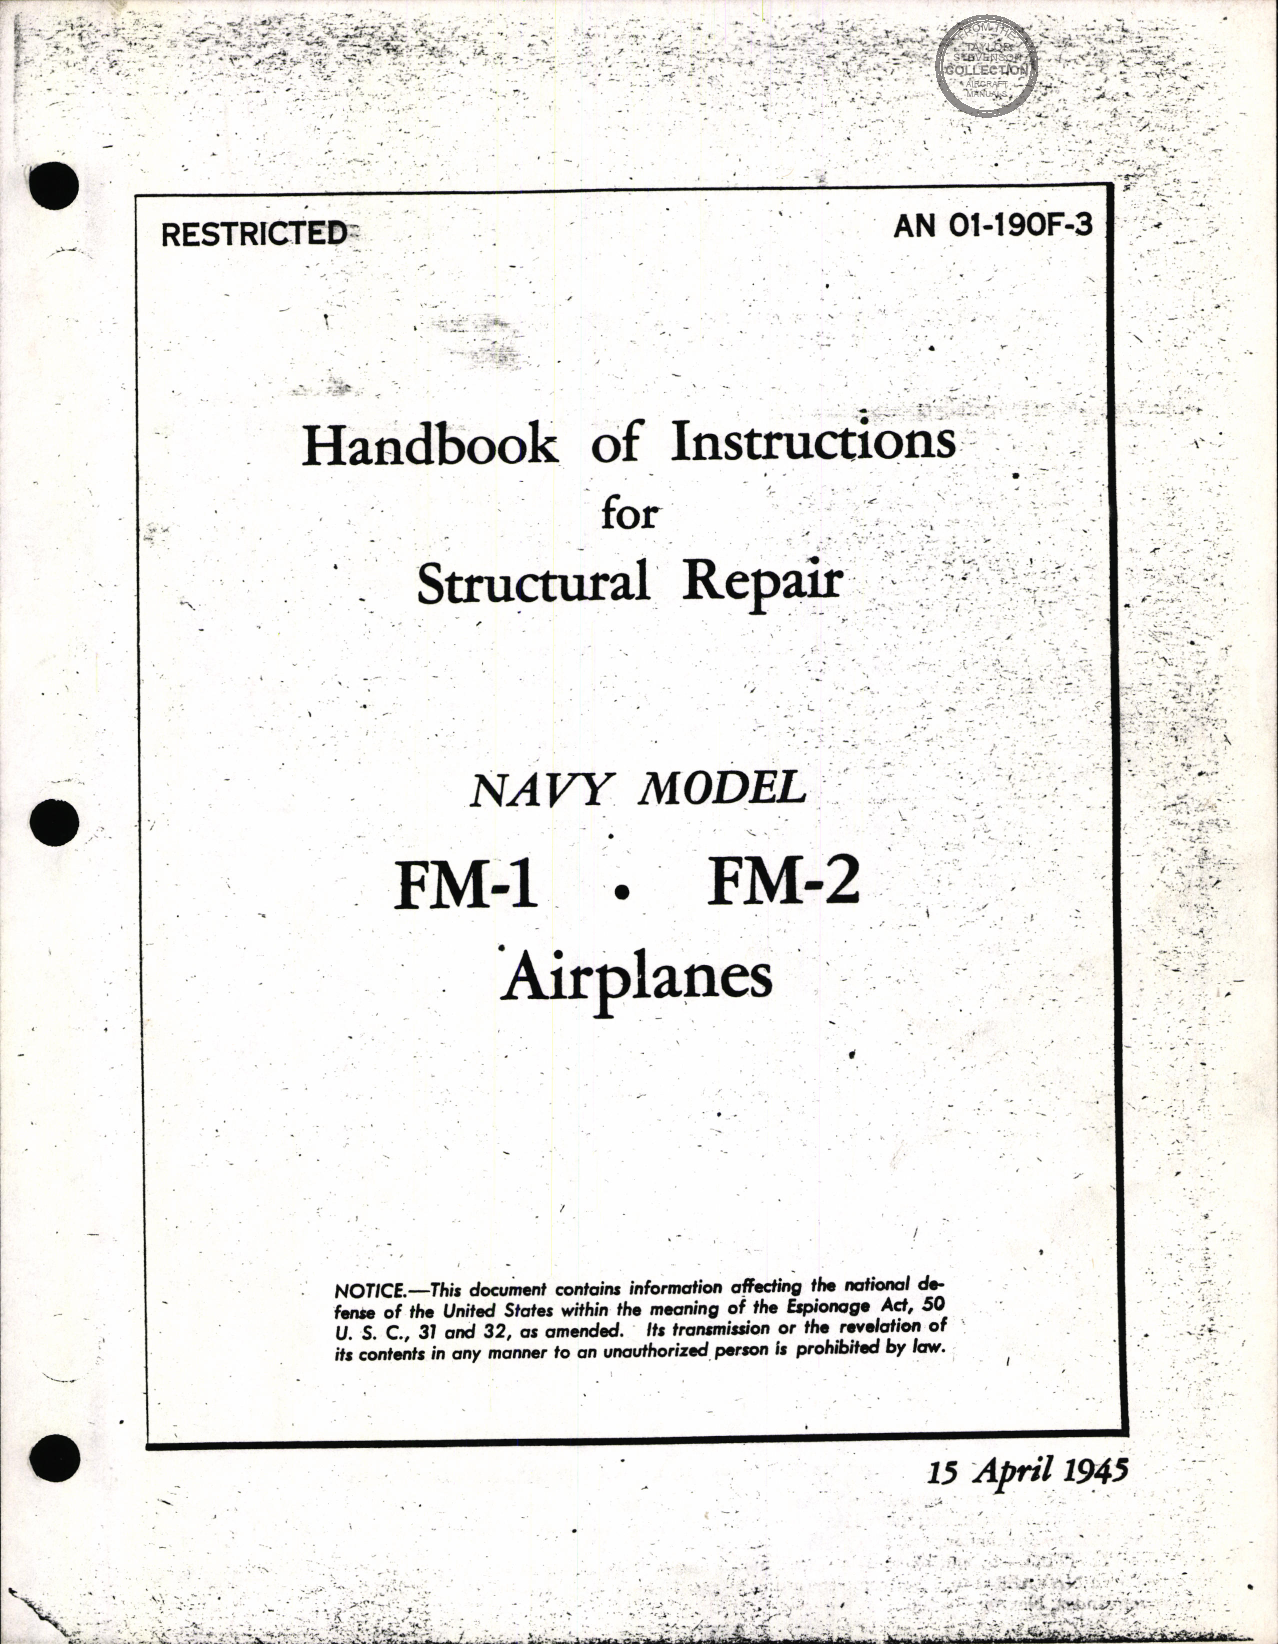 Sample page 1 from AirCorps Library document: Handbook of Instructions for Structural Repair for FM-1 and FM-2 Wildcat